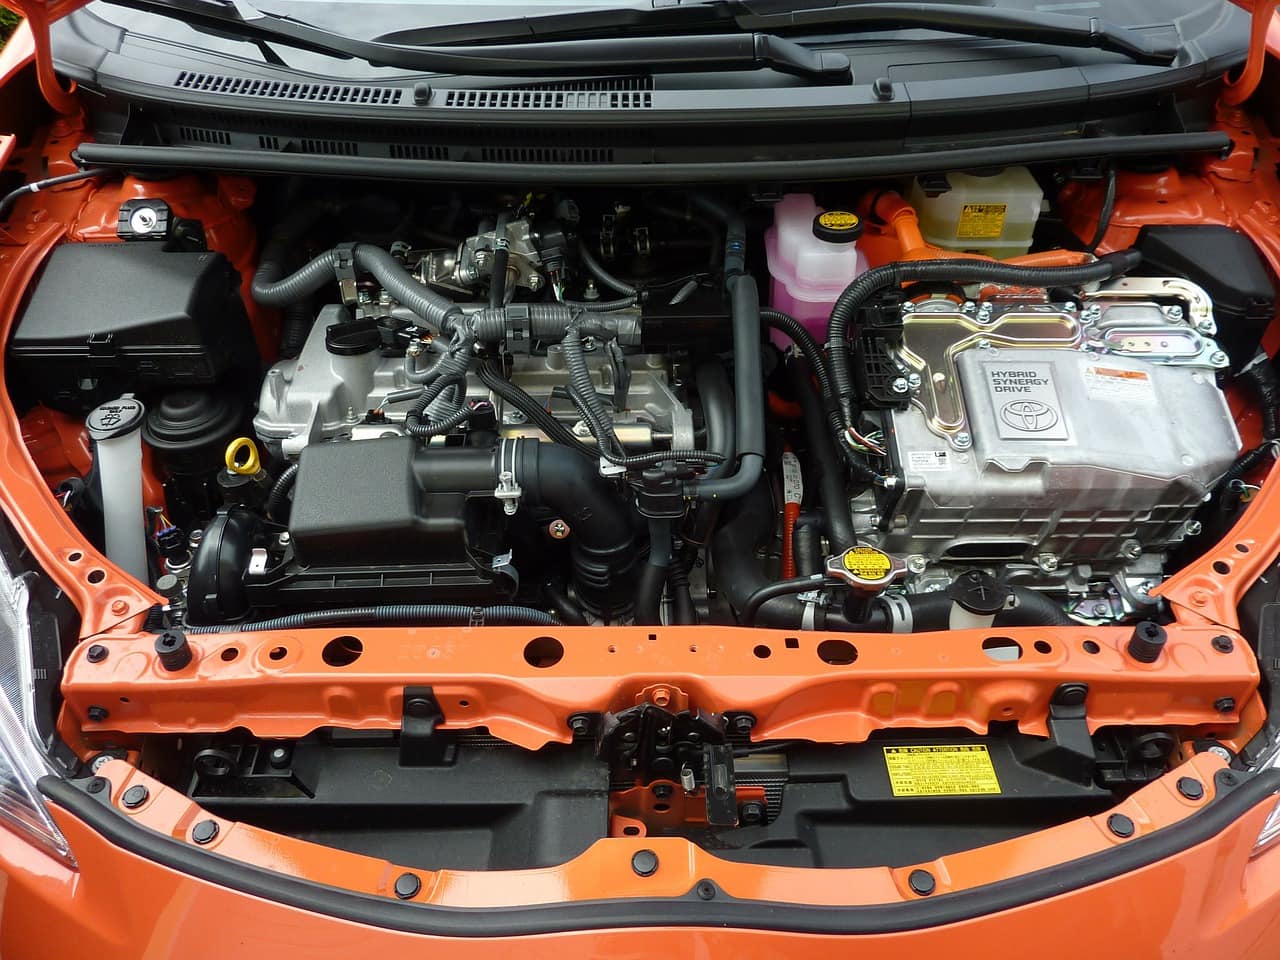 Can a Car Battery Be Too Dead to Jump Start?